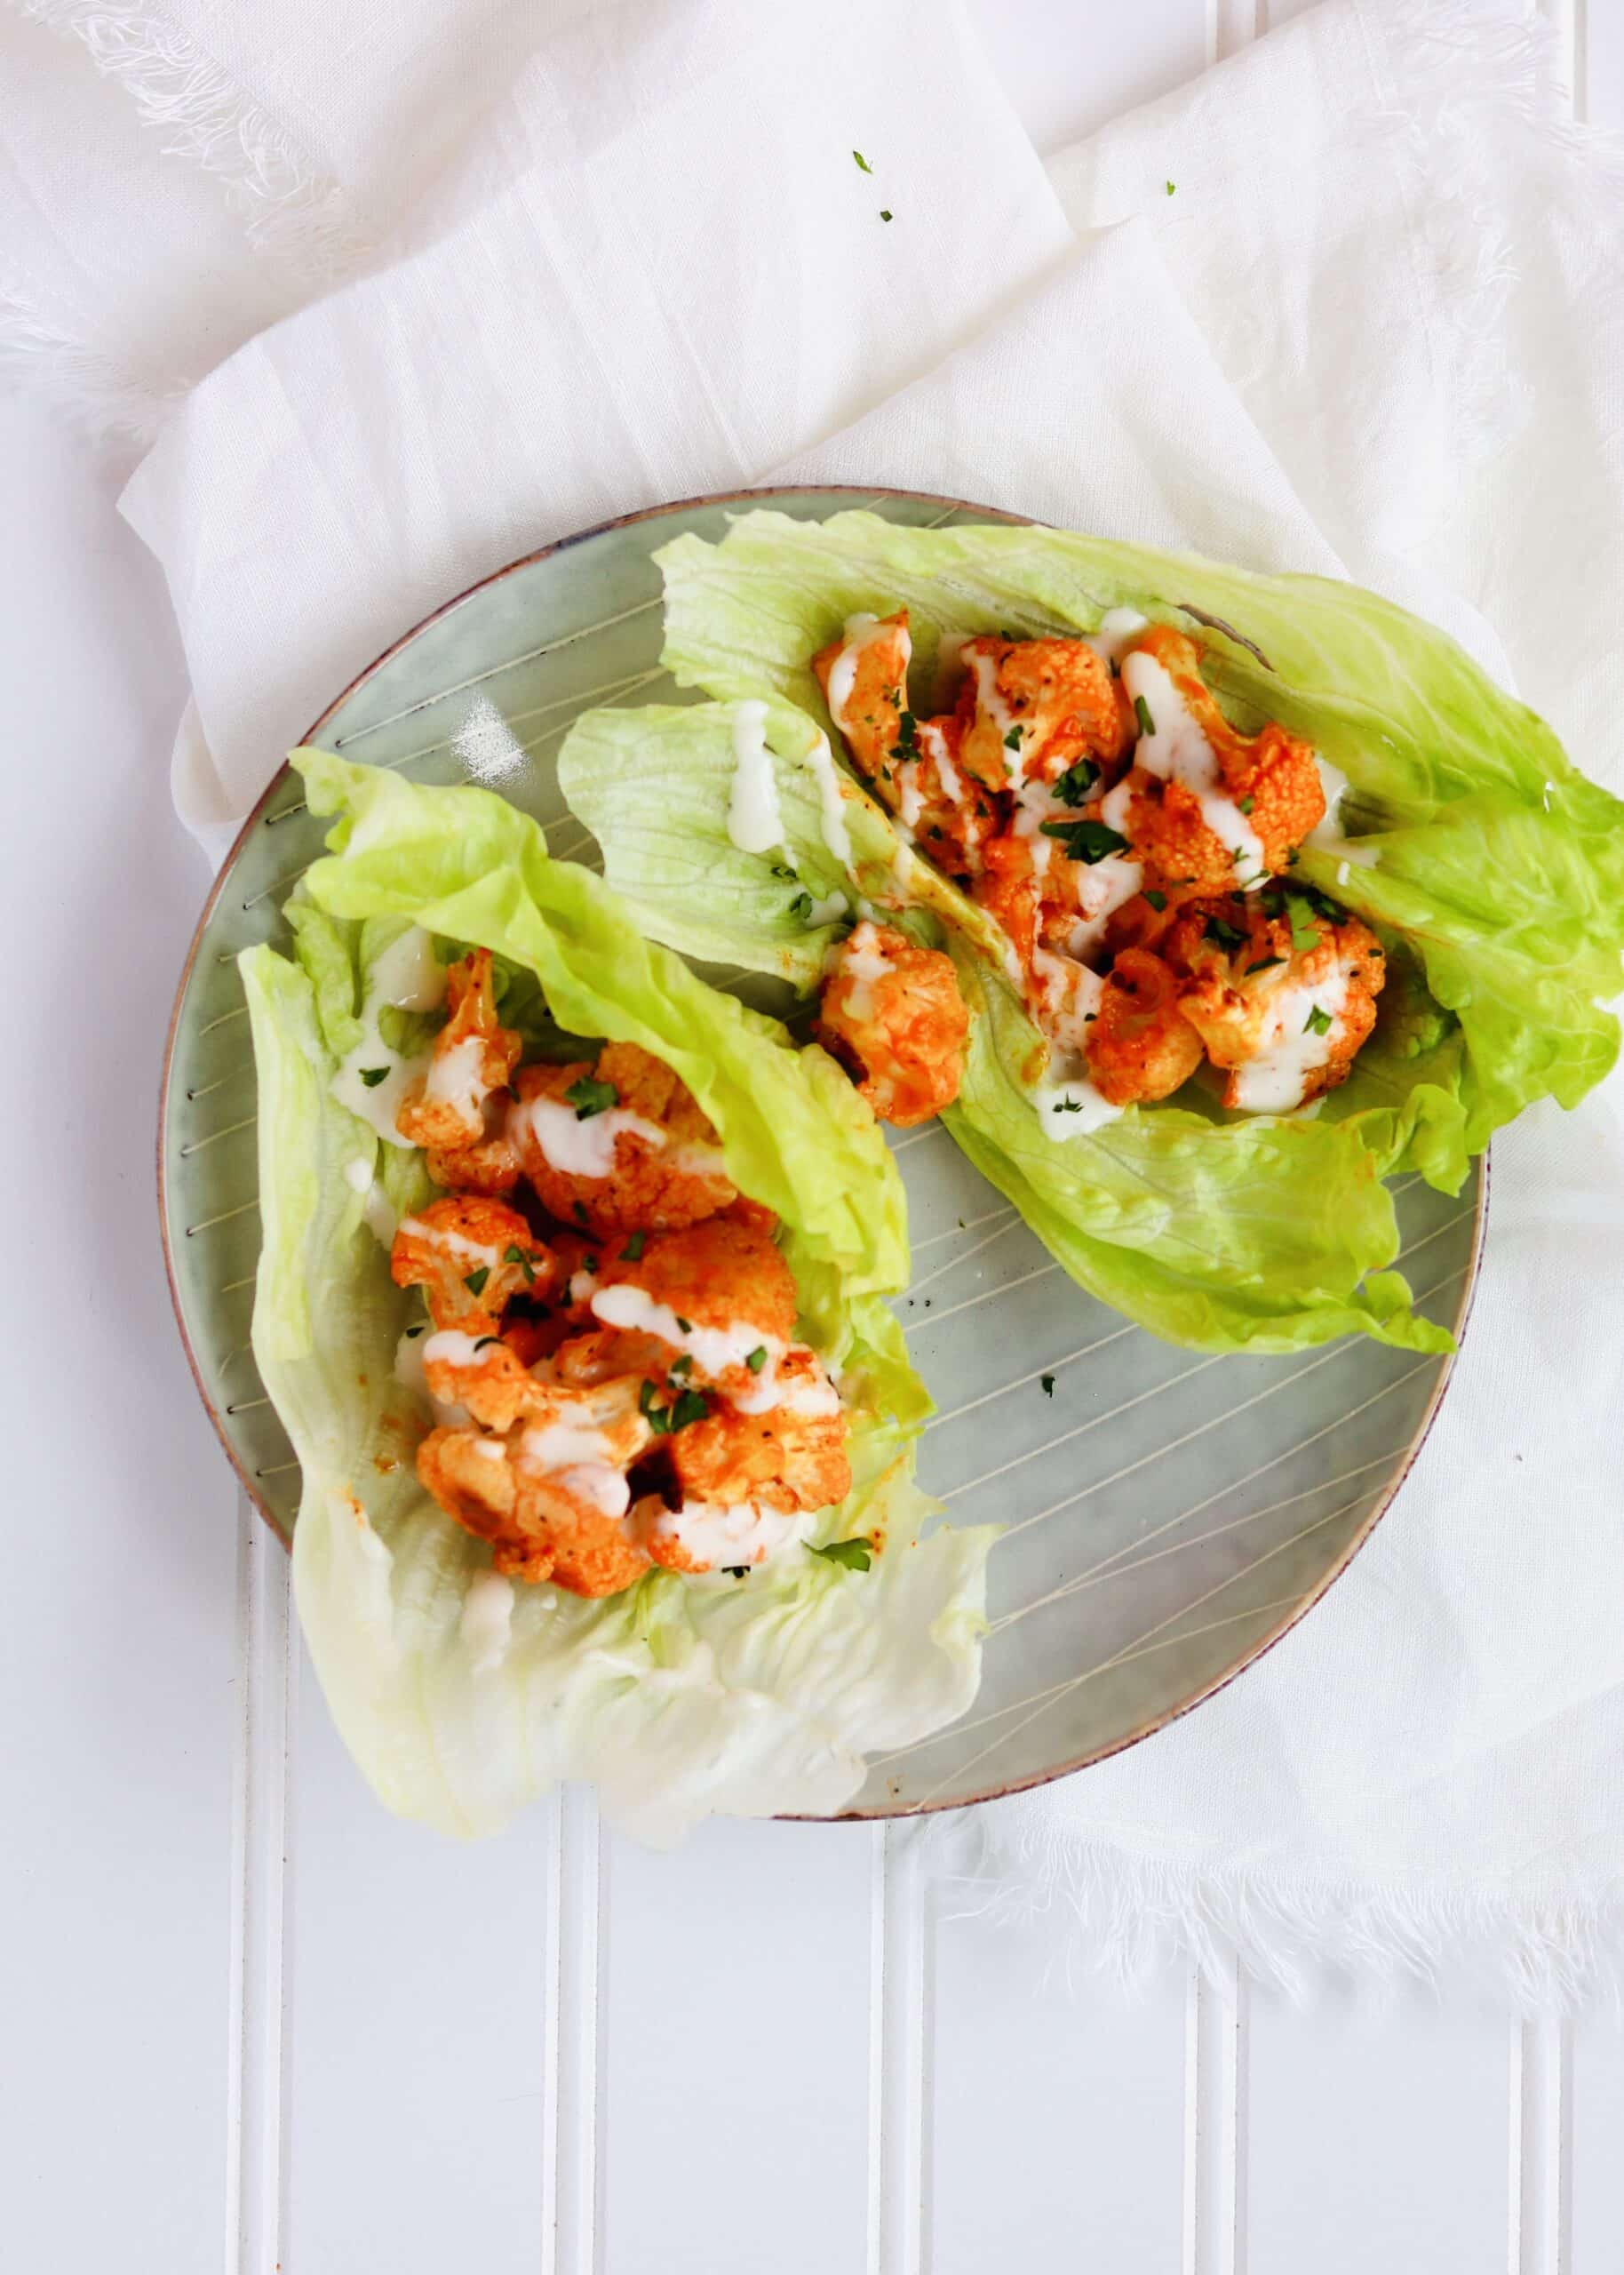 Buffalo Cauliflower Lettuce wraps are so simple and easy to make. Perfect for satisfying your buffalo craving in a healthy, plant-based, meatless way. Perfect as an appetizer or as part of a Meatless Monday dinner. Recipe at KathleensCravings.com #kathleenscravings #meatlessmonday #plantbased #cleaneating #vegetarianappetizer #buffalolettucewraps #cauliflowerrecipes